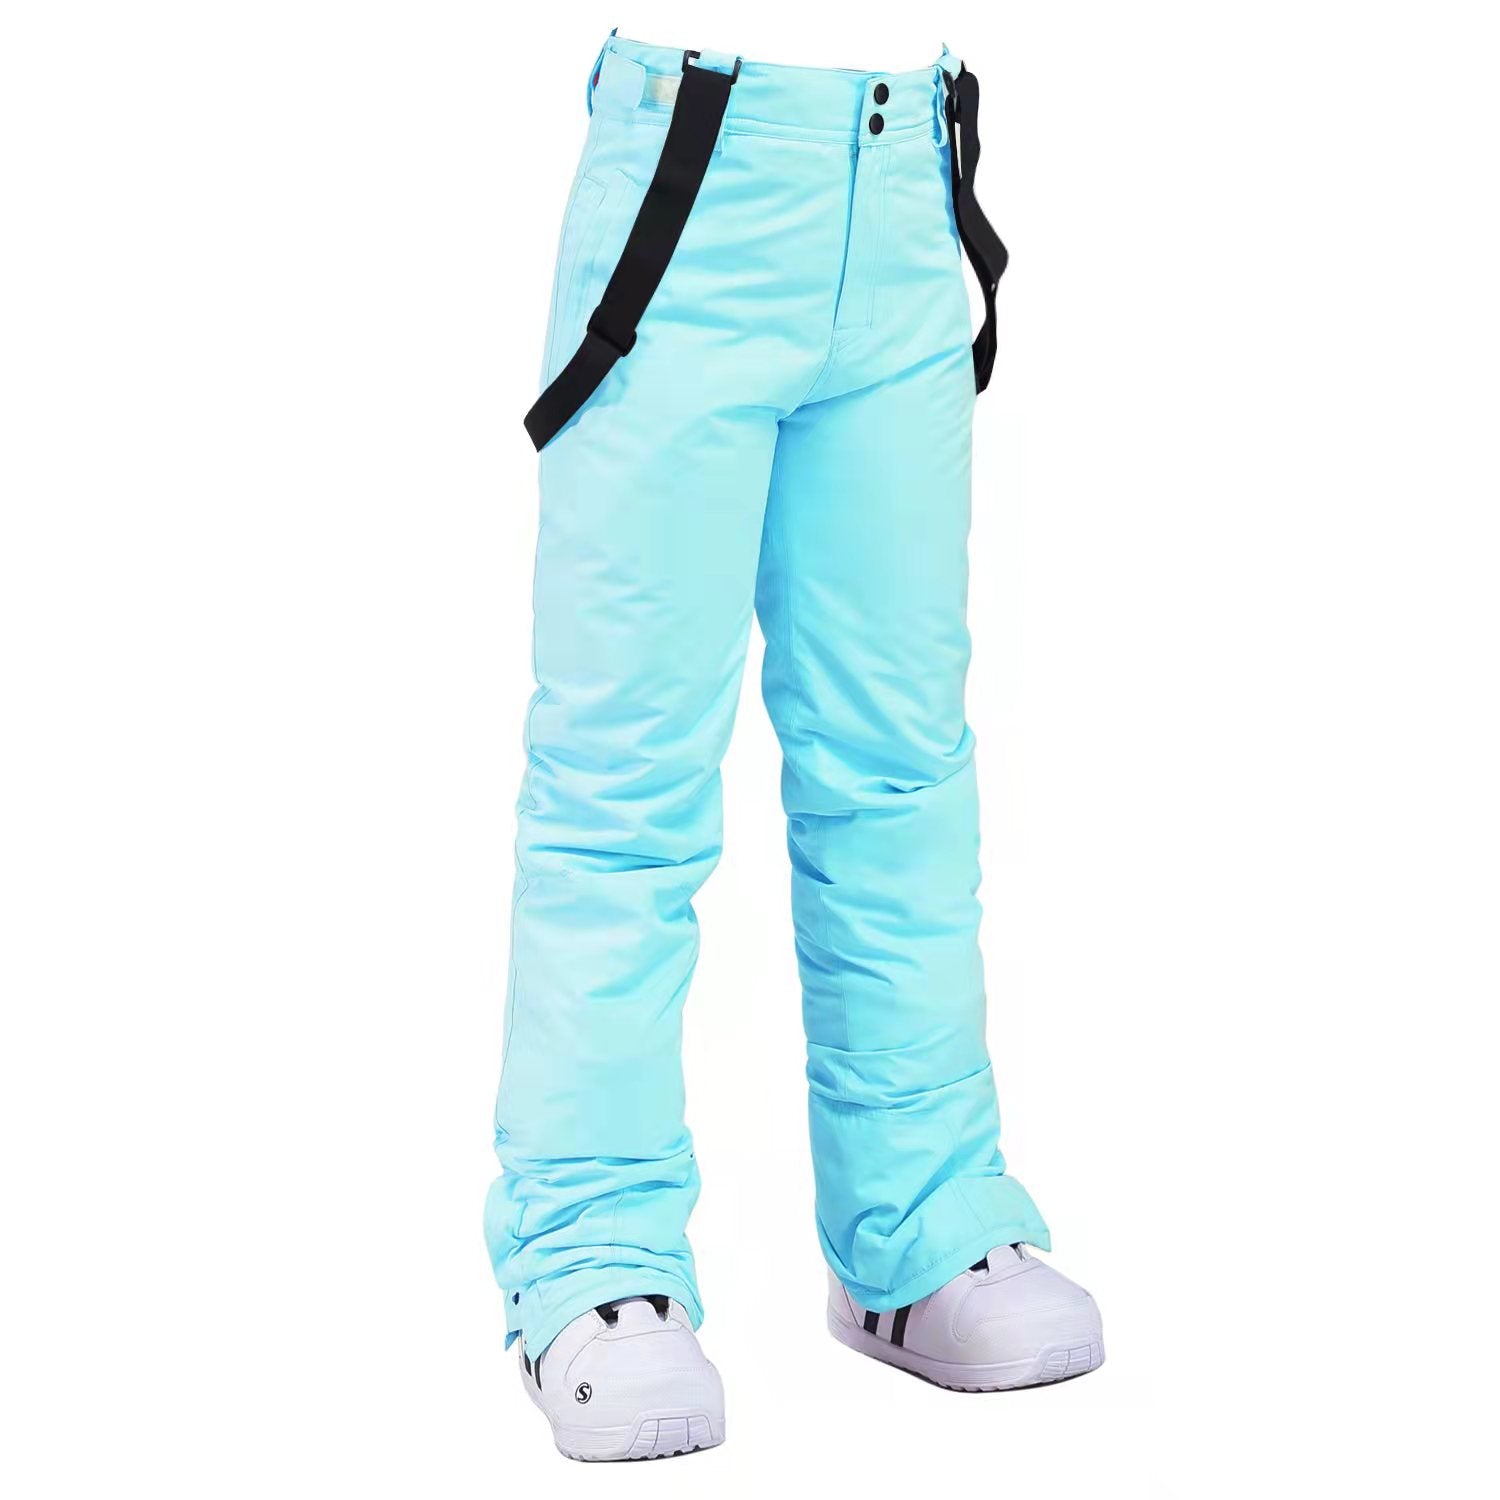 Misty Mountain Women's Size Medium Insulated Pants for Snow Sports